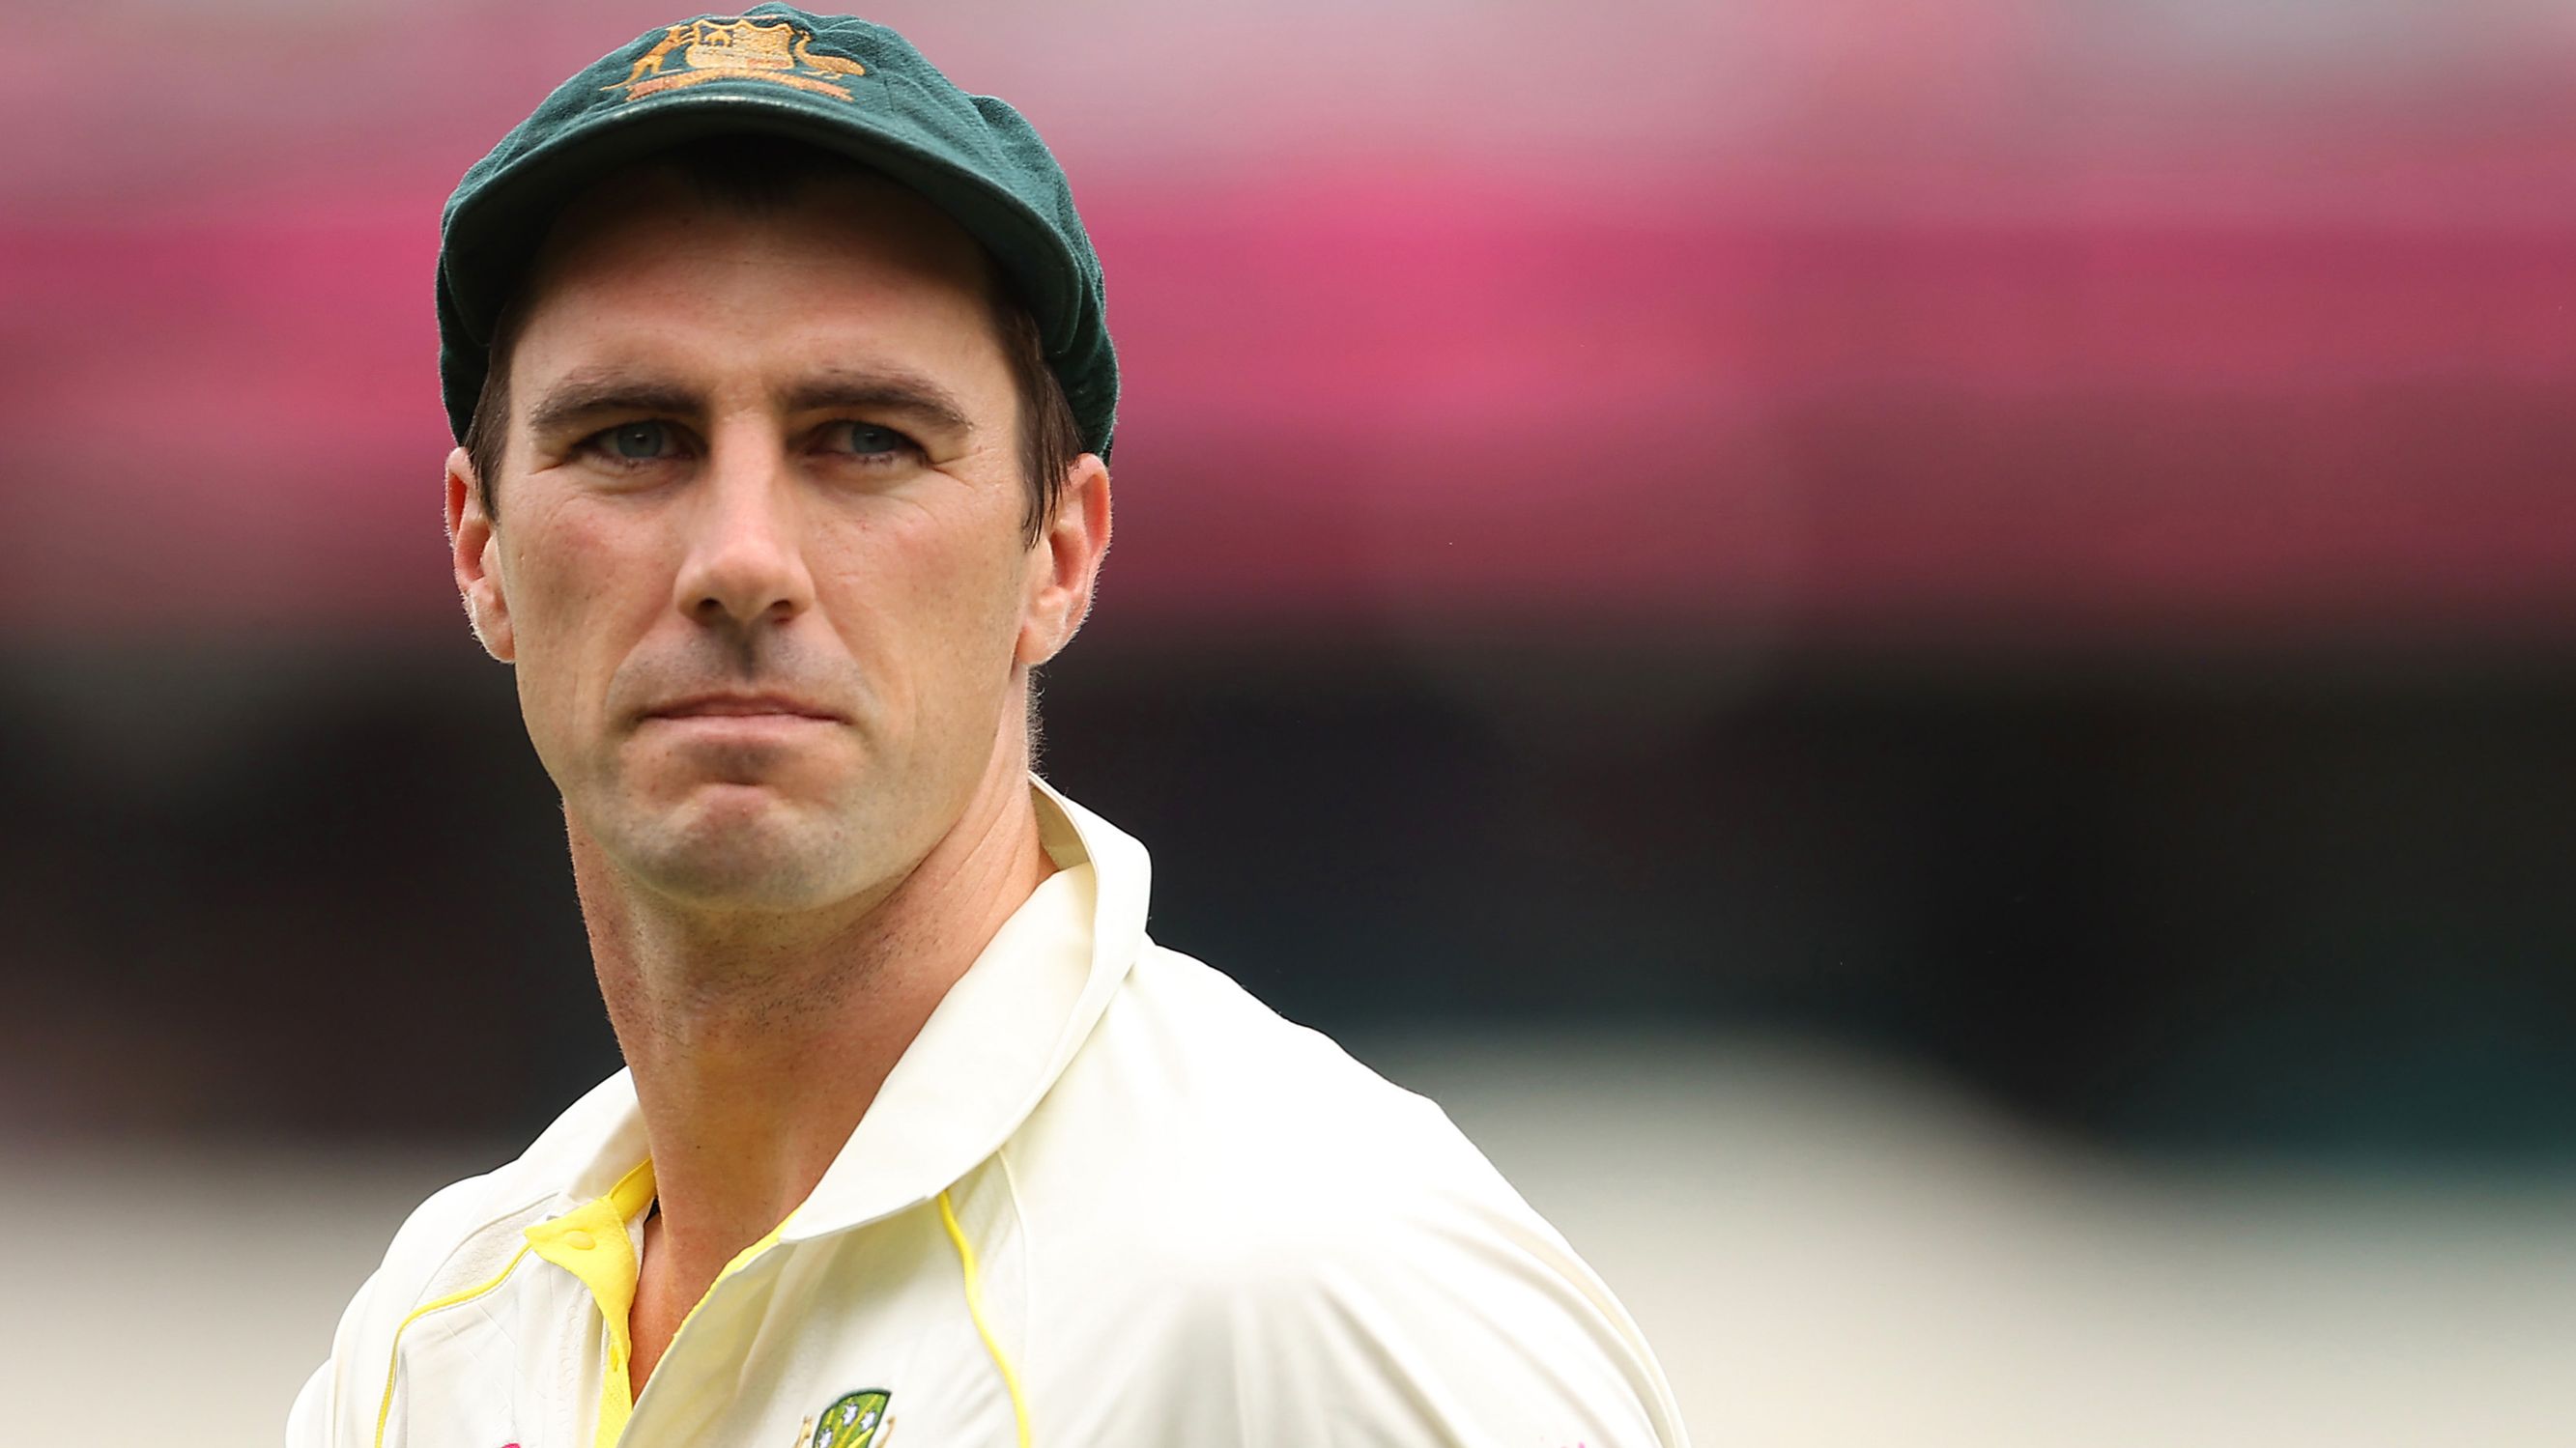 Pat Cummins of Australia looks on during day four of the Third Test match in the series between Australia and South Africa at Sydney Cricket Ground on January 07, 2023 in Sydney, Australia. (Photo by Mark Kolbe/Getty Images)